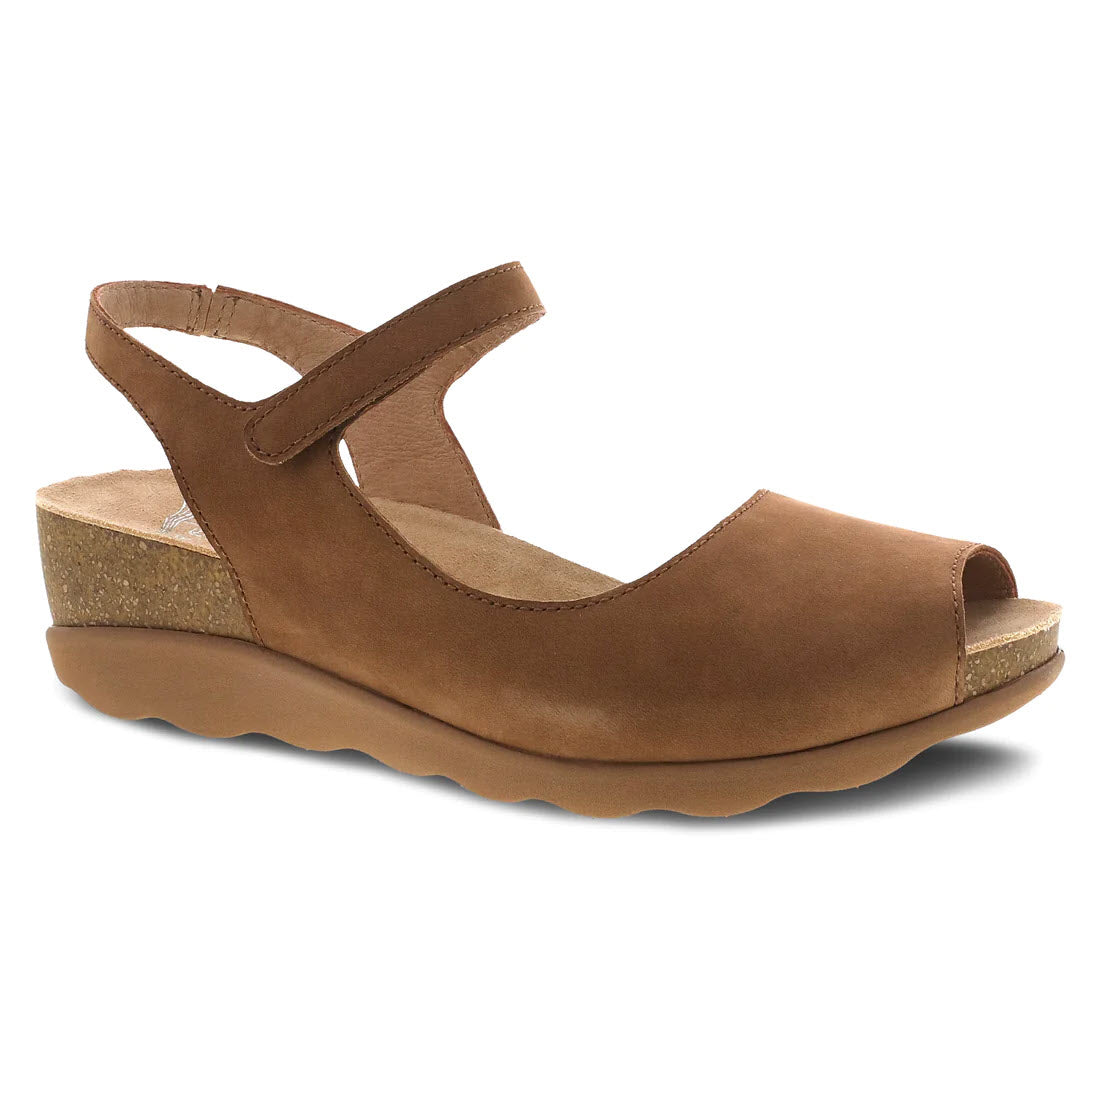 A brown suede Dansko Marcy Wedge sandal with an adjustable ankle strap and cork heel, isolated on a white background.